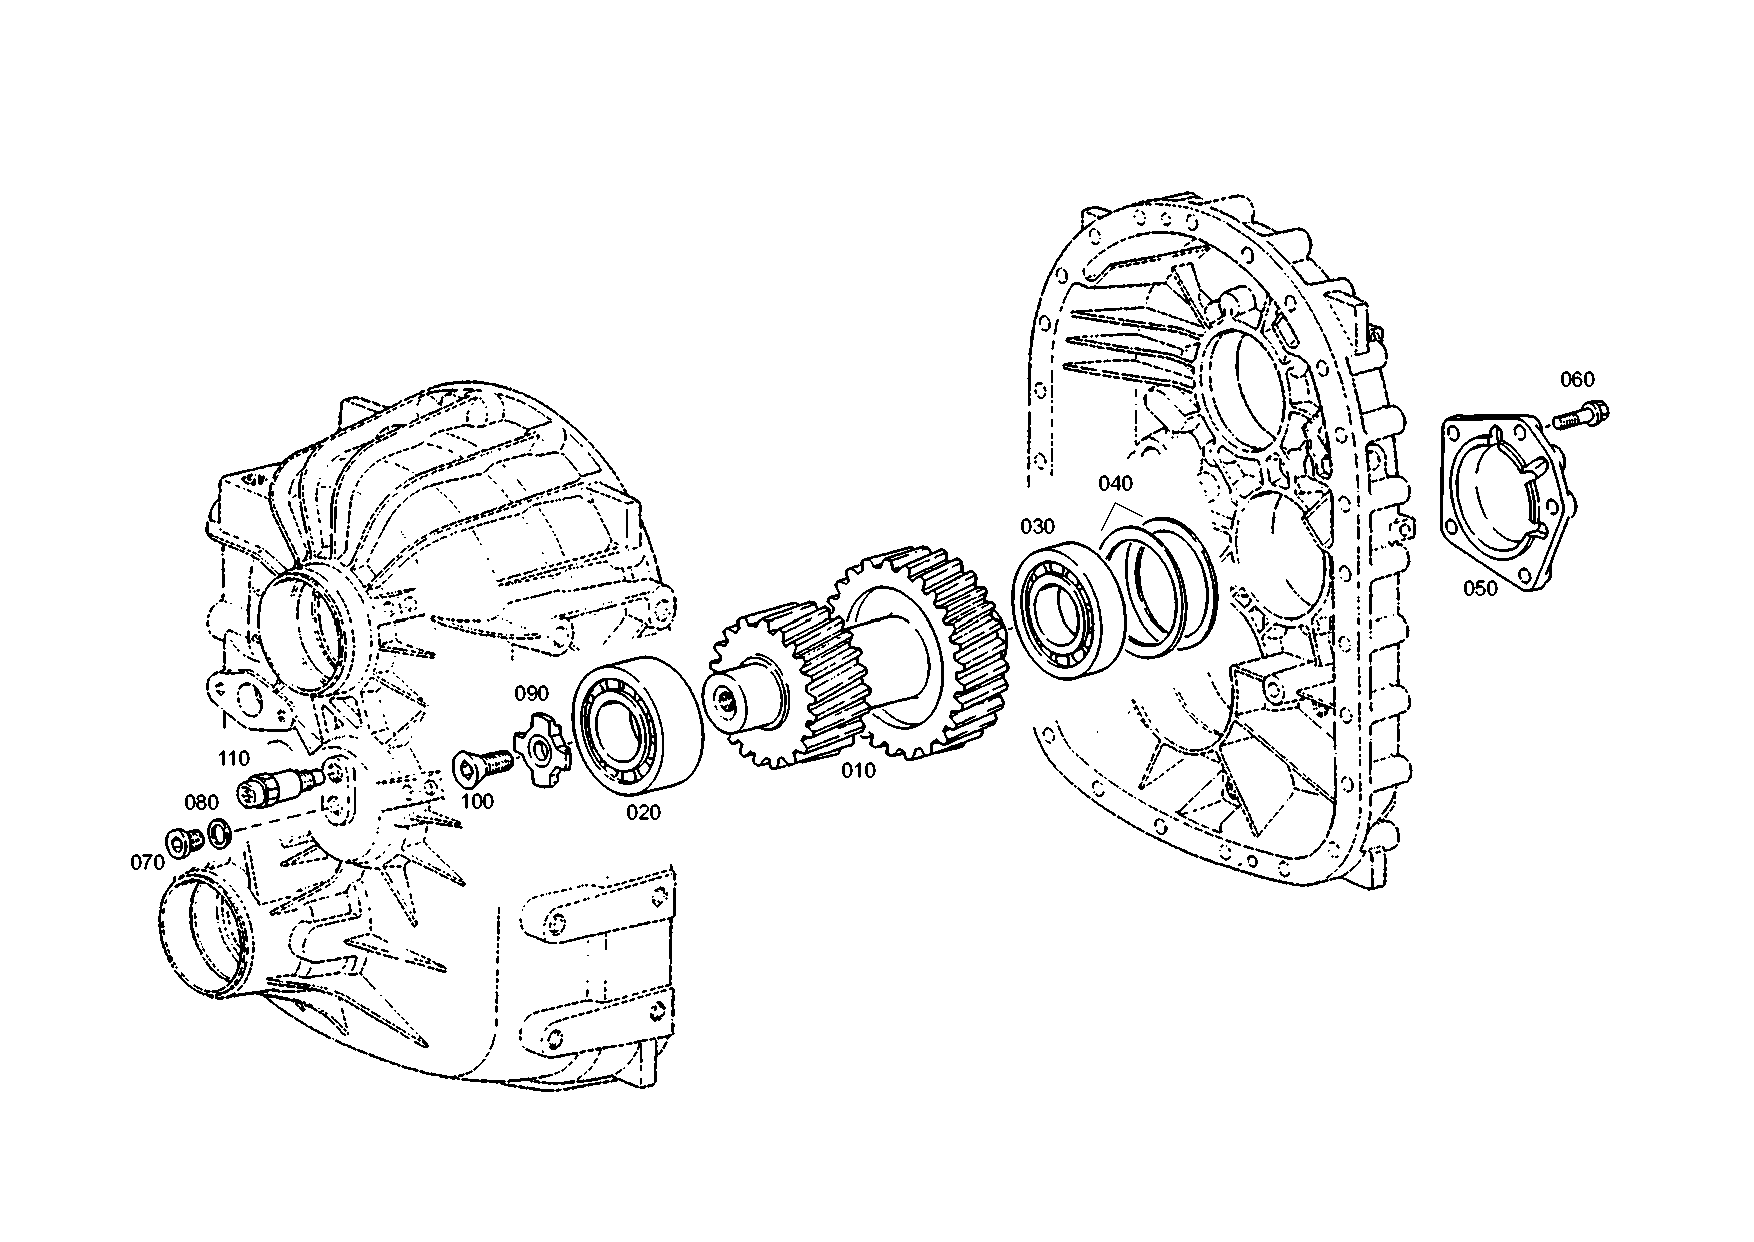 drawing for MARMON Herring MVG751061 - DOUBLE GEAR (figure 2)